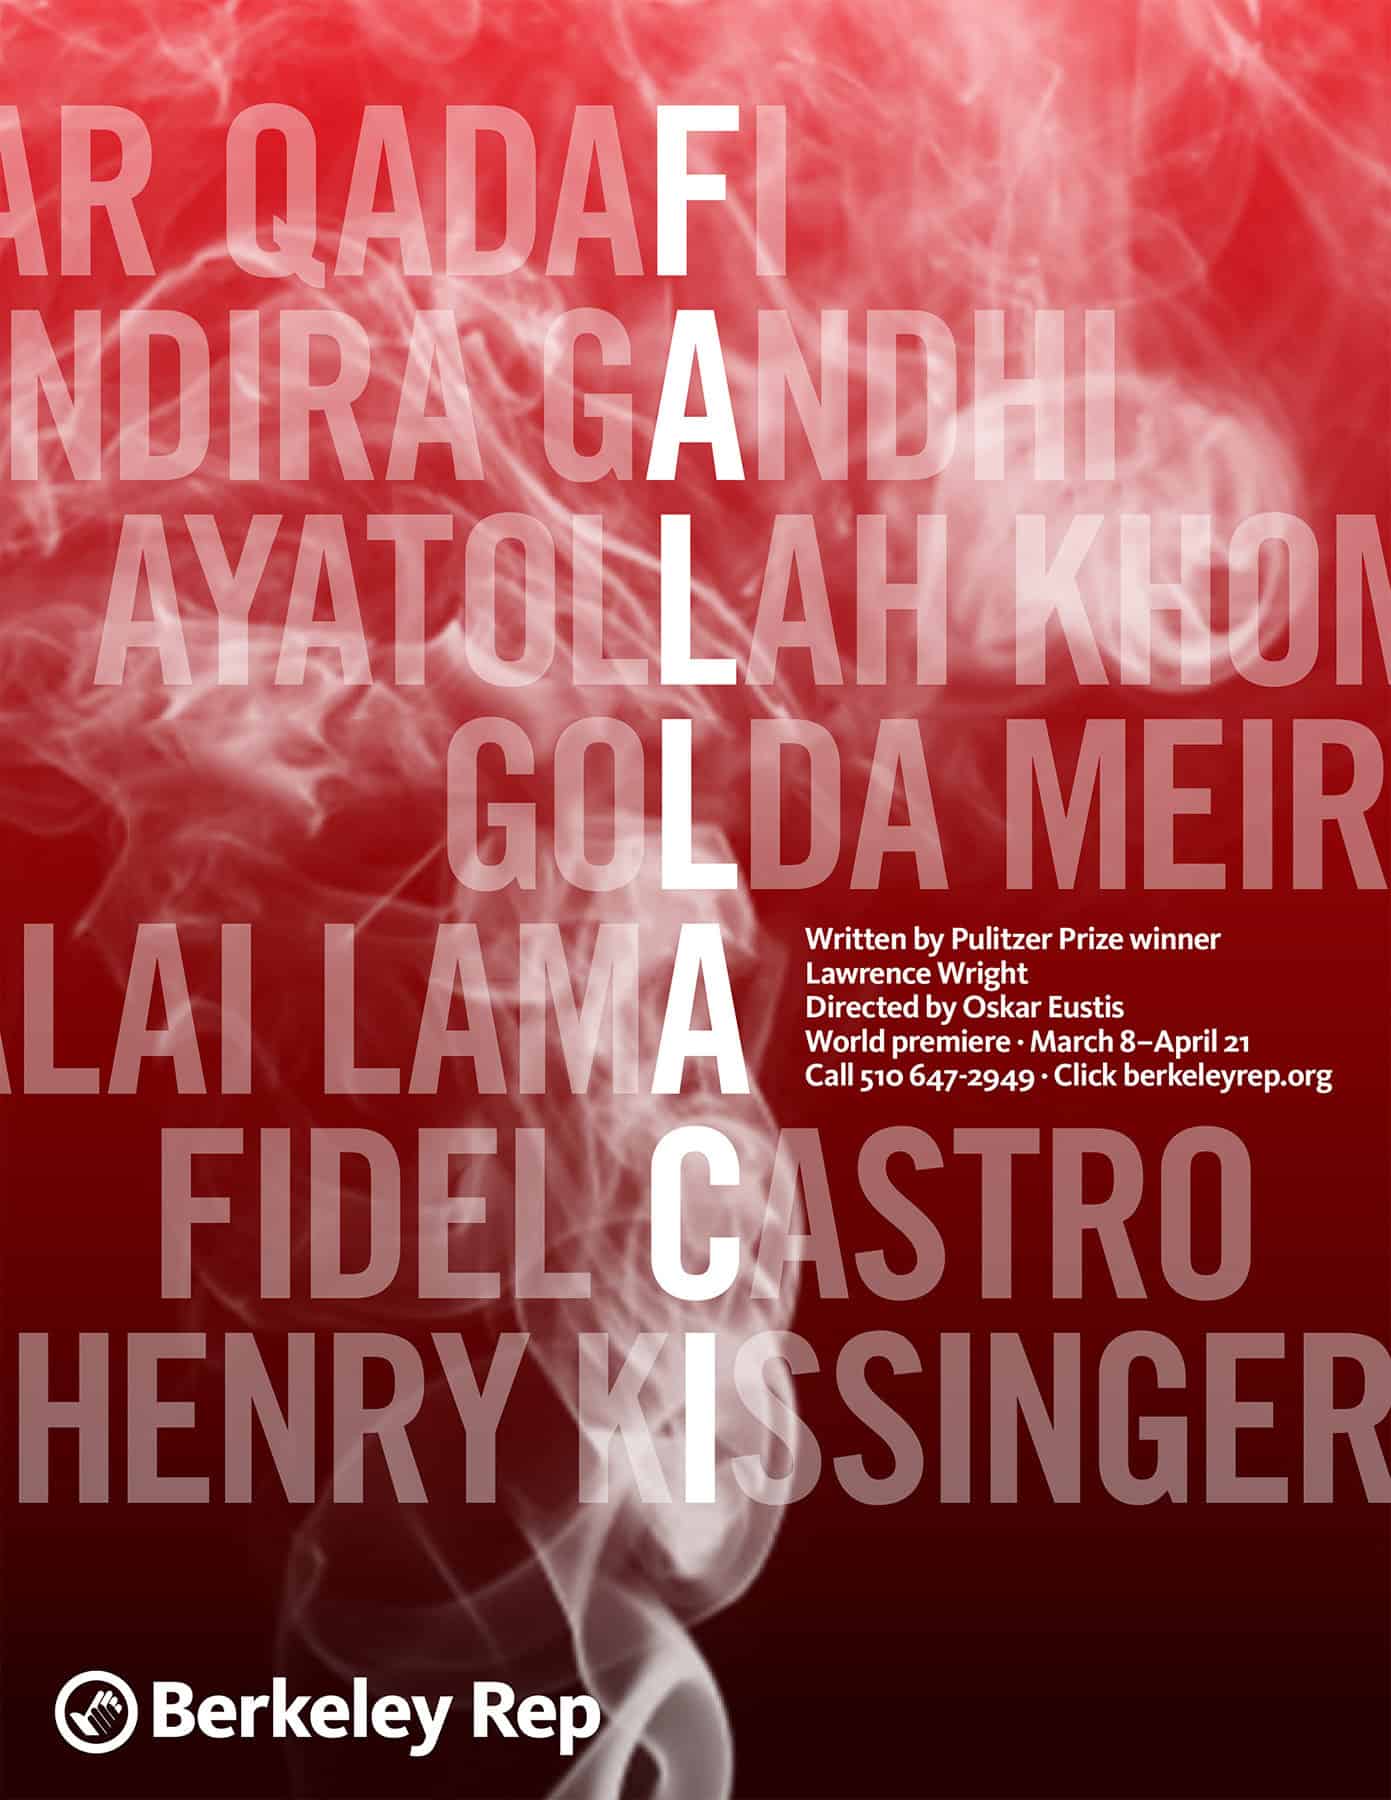 Poster for the play "Fallaci" at Berkeley Rep. The image is of cigarette smoke rising from the bottom against a red to black gradient. There are seven translucent names, one to each line, in large capital letters, such as Qadafi to Kissinger, one letter of each name standing out in a vertical column to reveal the letters FALLACI (each name is a famous person Oriana Fallaci interviewed; she also famously had a raspy voice from smoking).